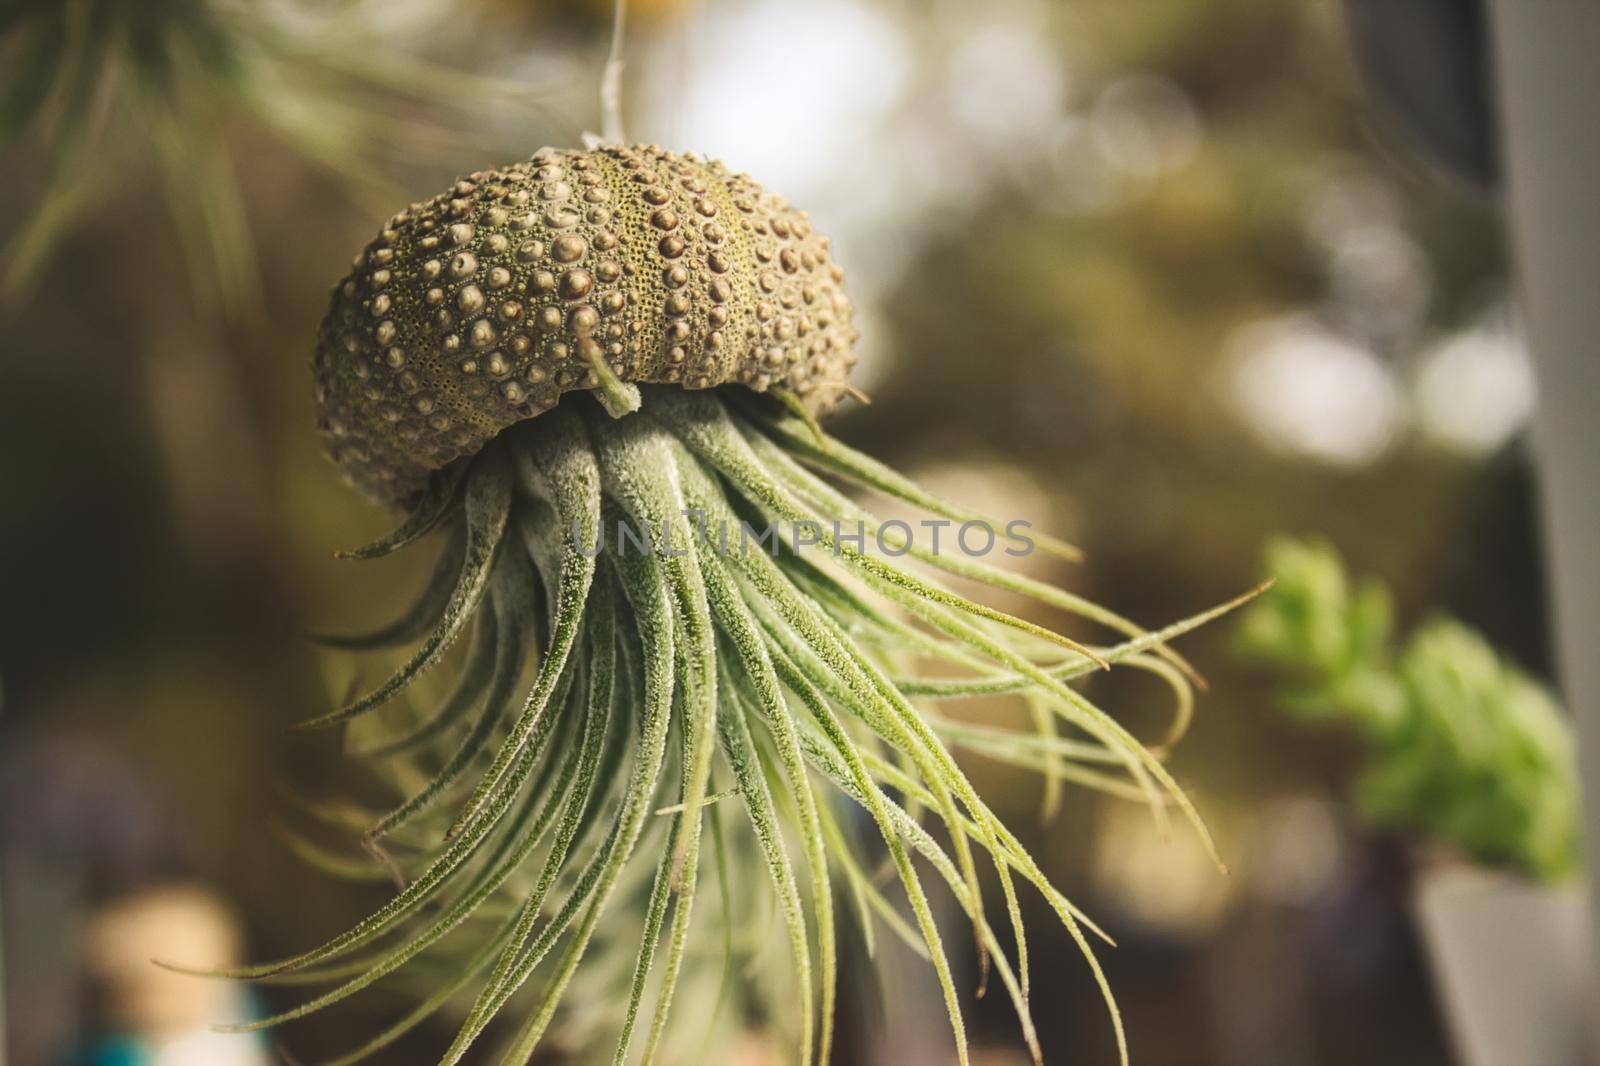 Epiphyte (Tillandsia) air plant growing out of a hollowed out sea shell hanging from a thread